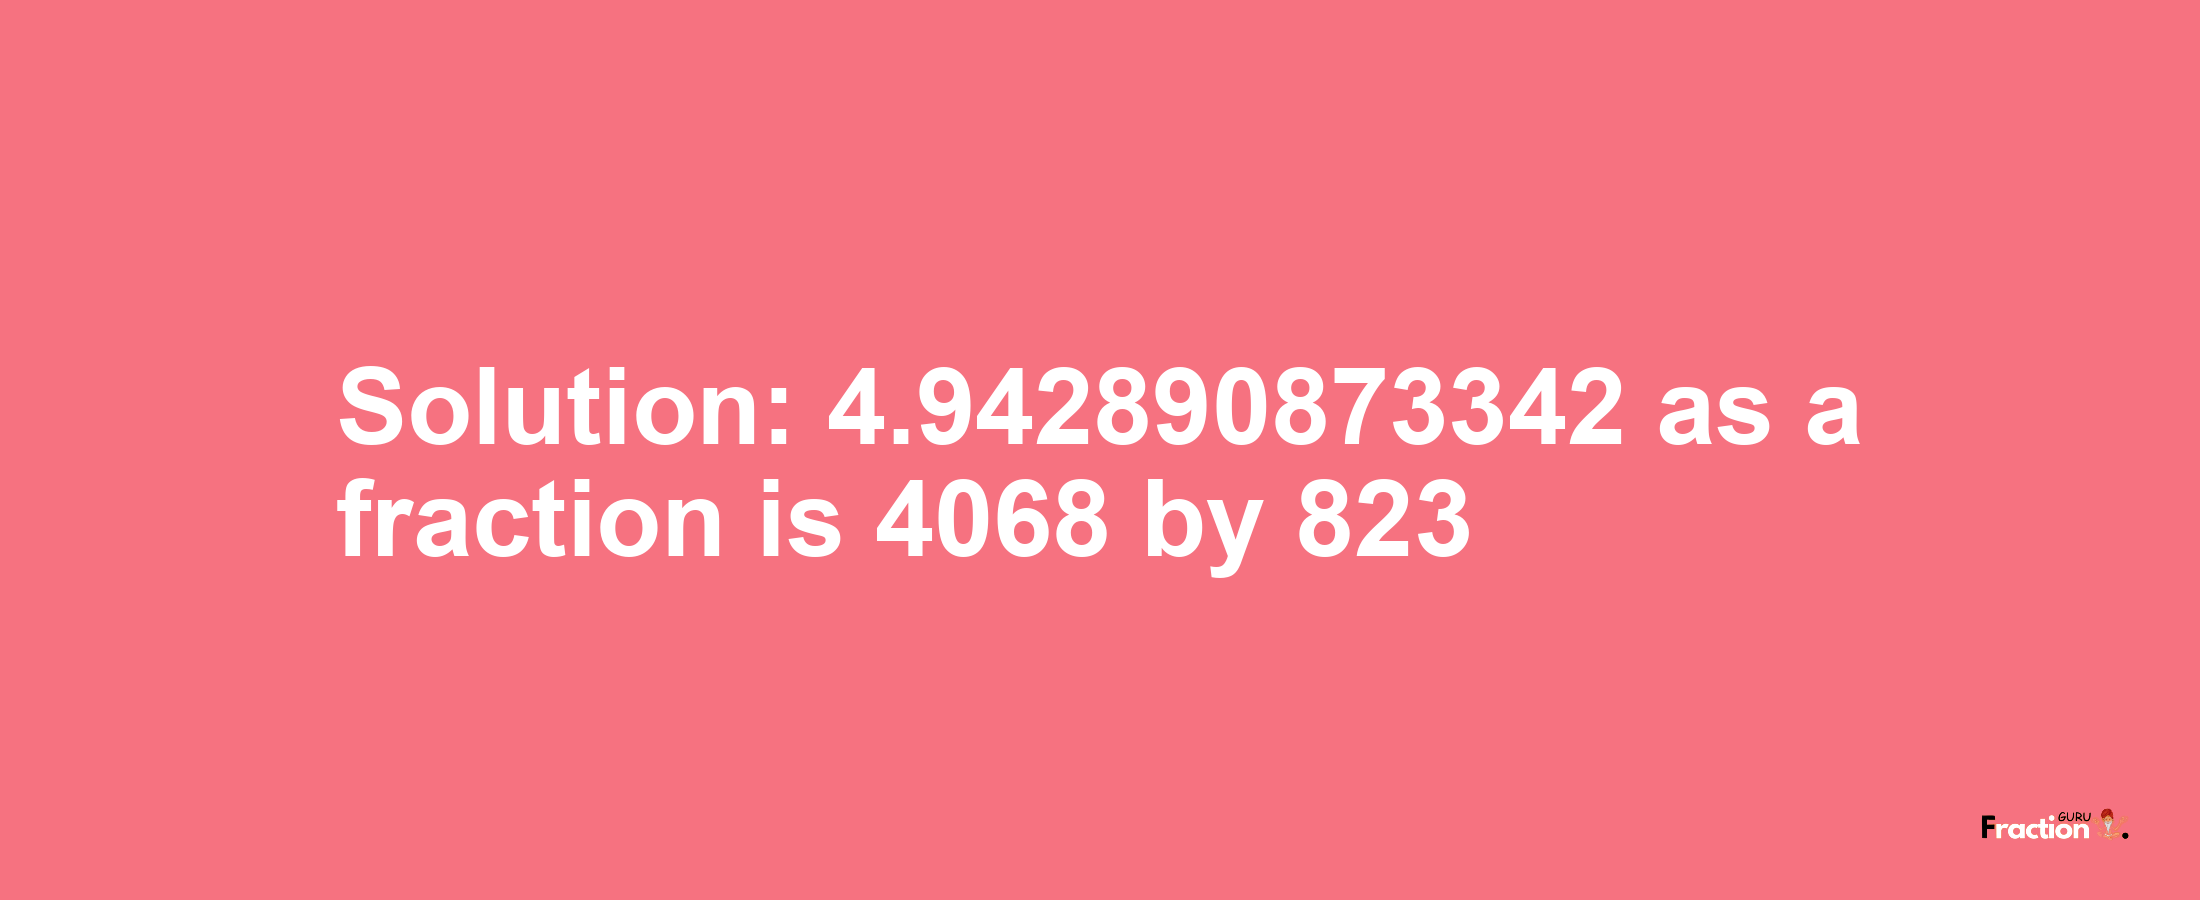 Solution:4.942890873342 as a fraction is 4068/823